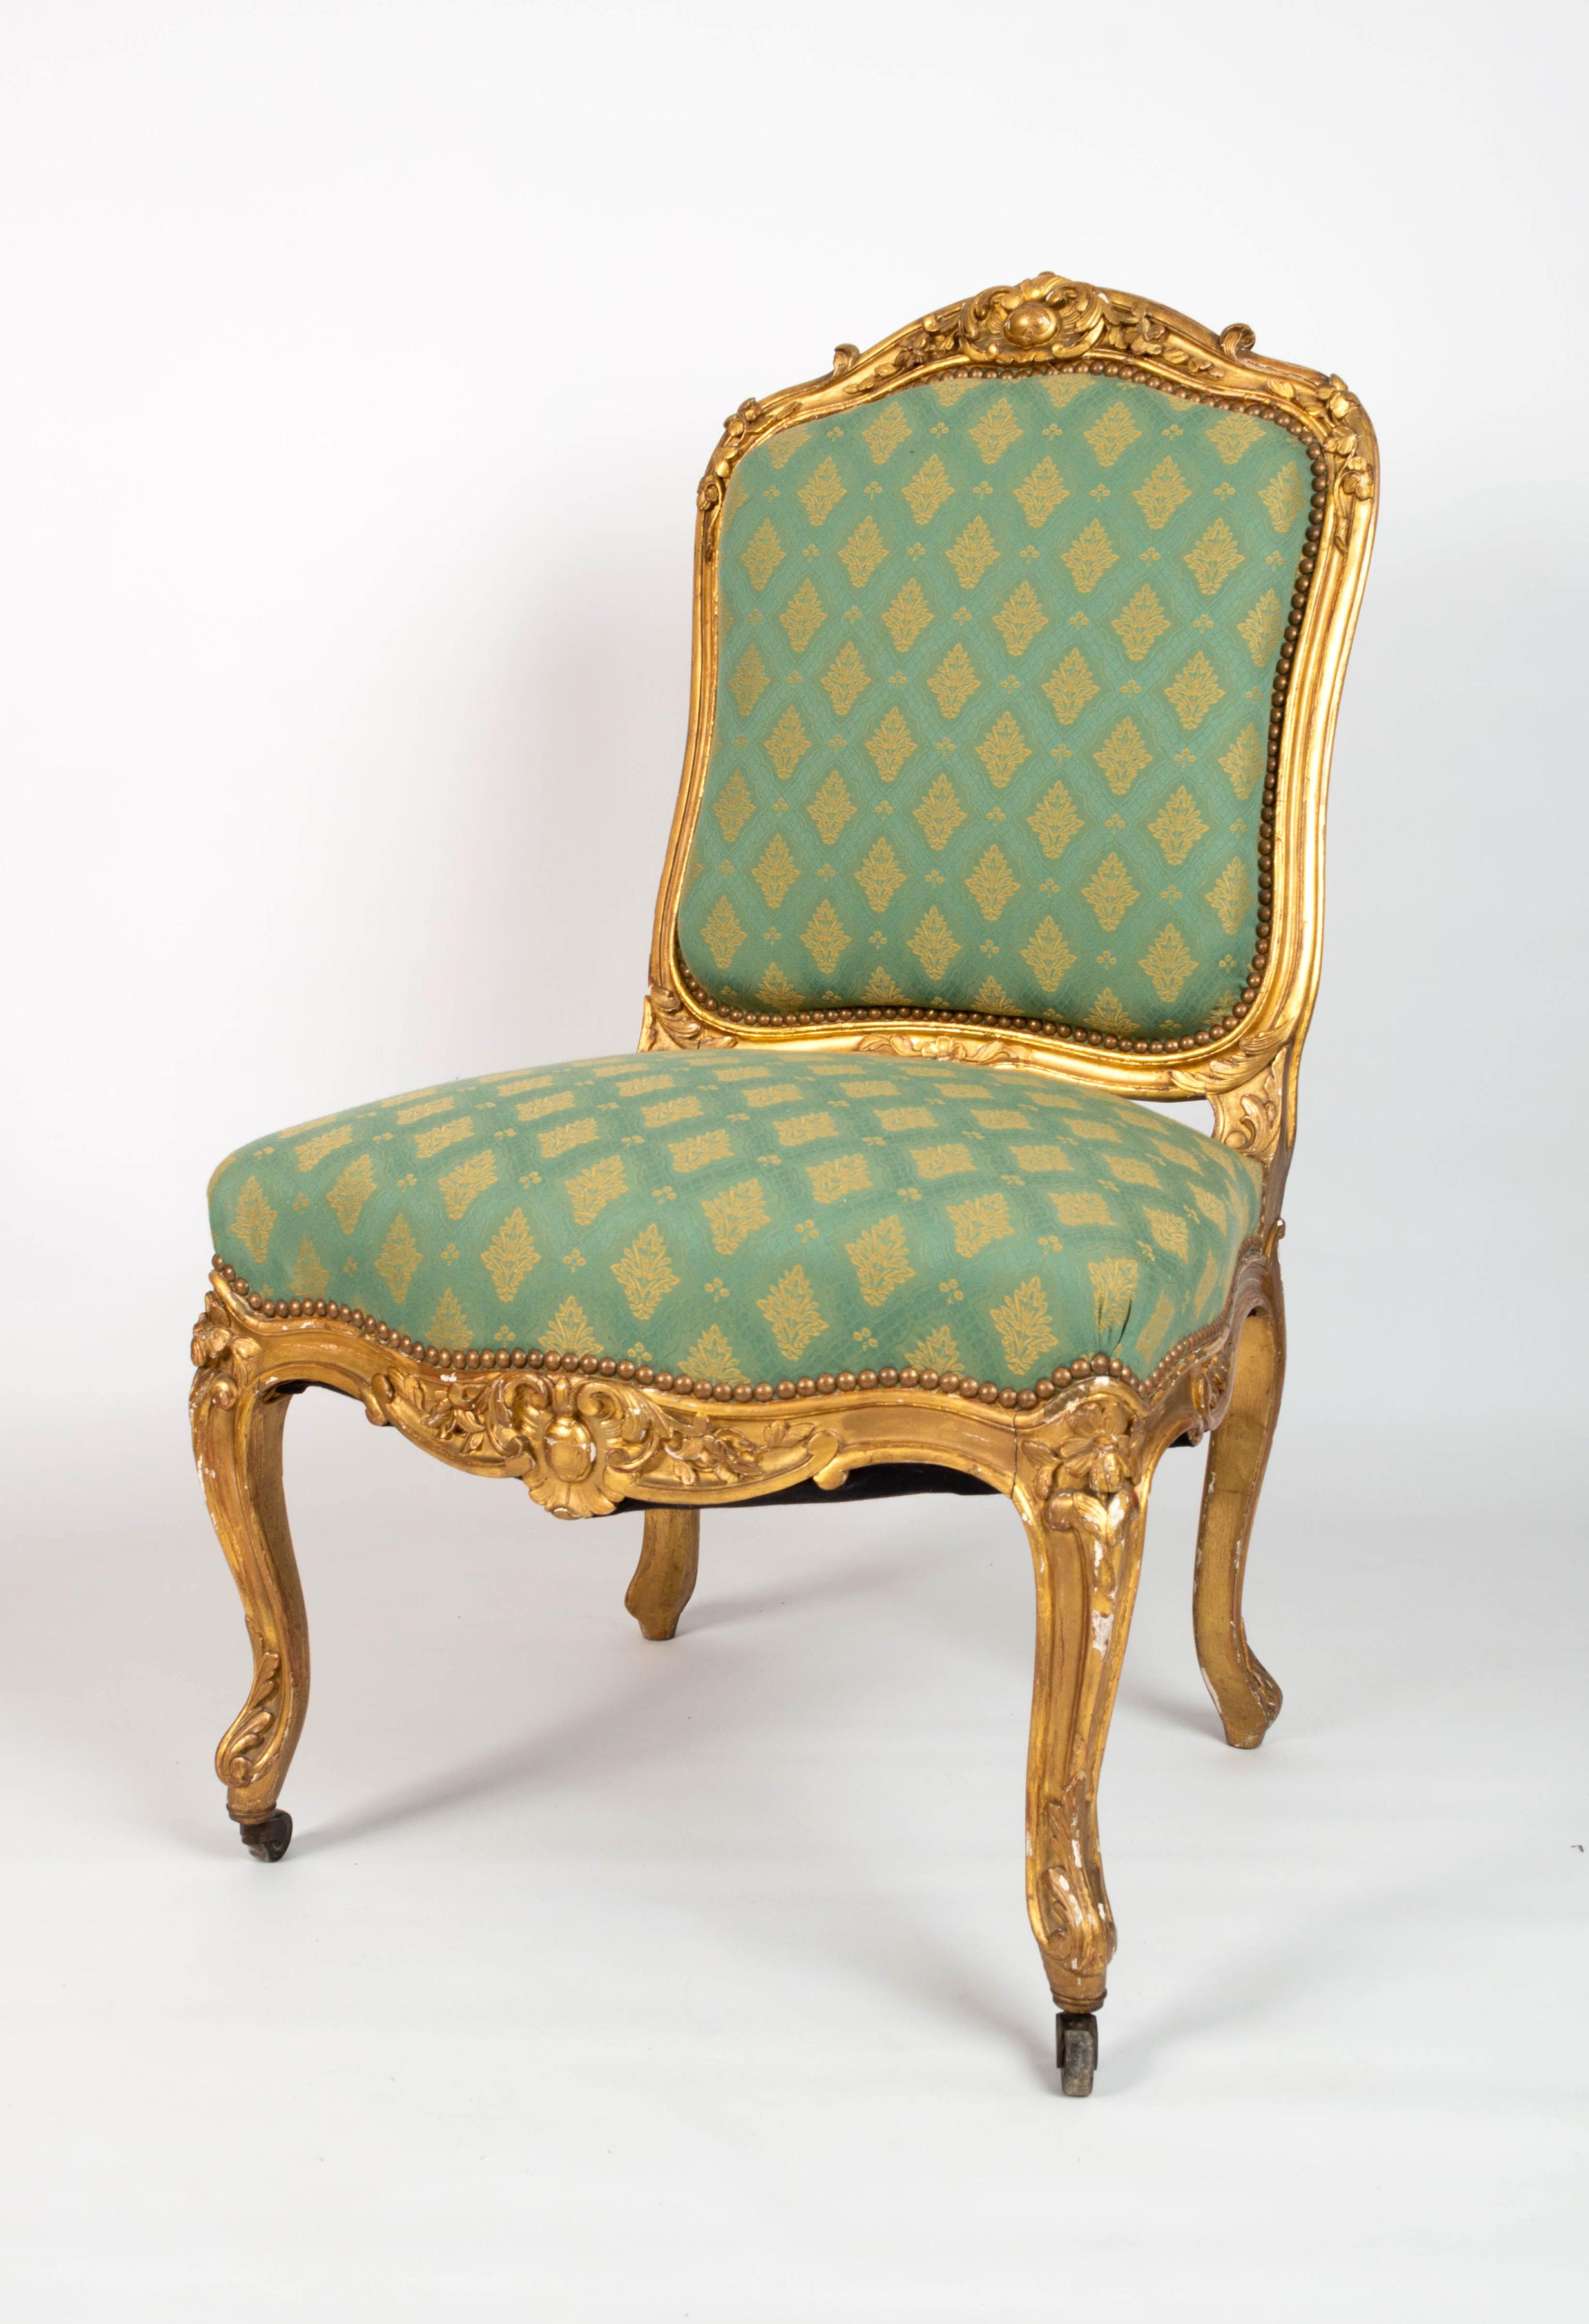 Pair Antique French 19th Century Louis XV Style Giltwood Salon Chairs C.1870 For Sale 9